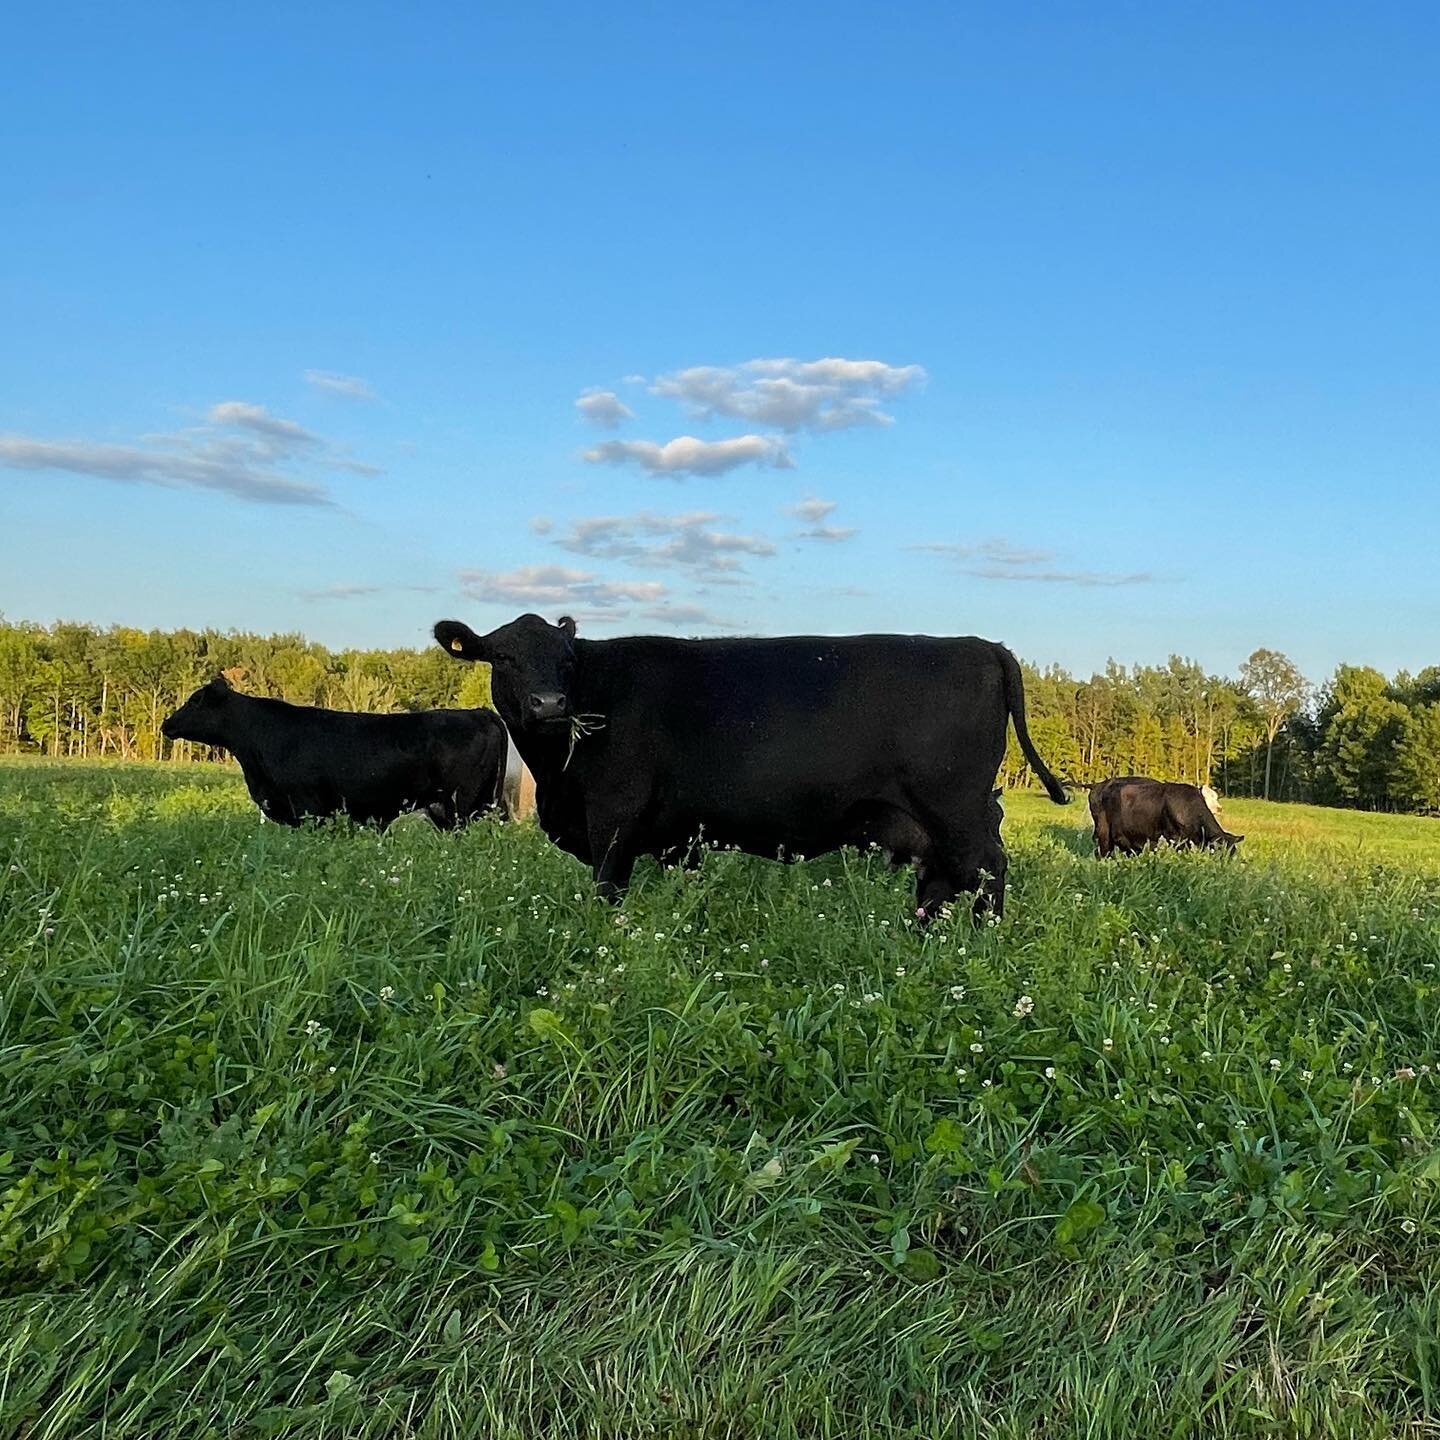 The ladies are out on the new pasture and loving it. ❤️ Looking to buy some family farm raised beef in the Chippewa Valley? Check us out! 

#lakeholcombe #familyfarms #chippewavalley #happycows #runamuckranch